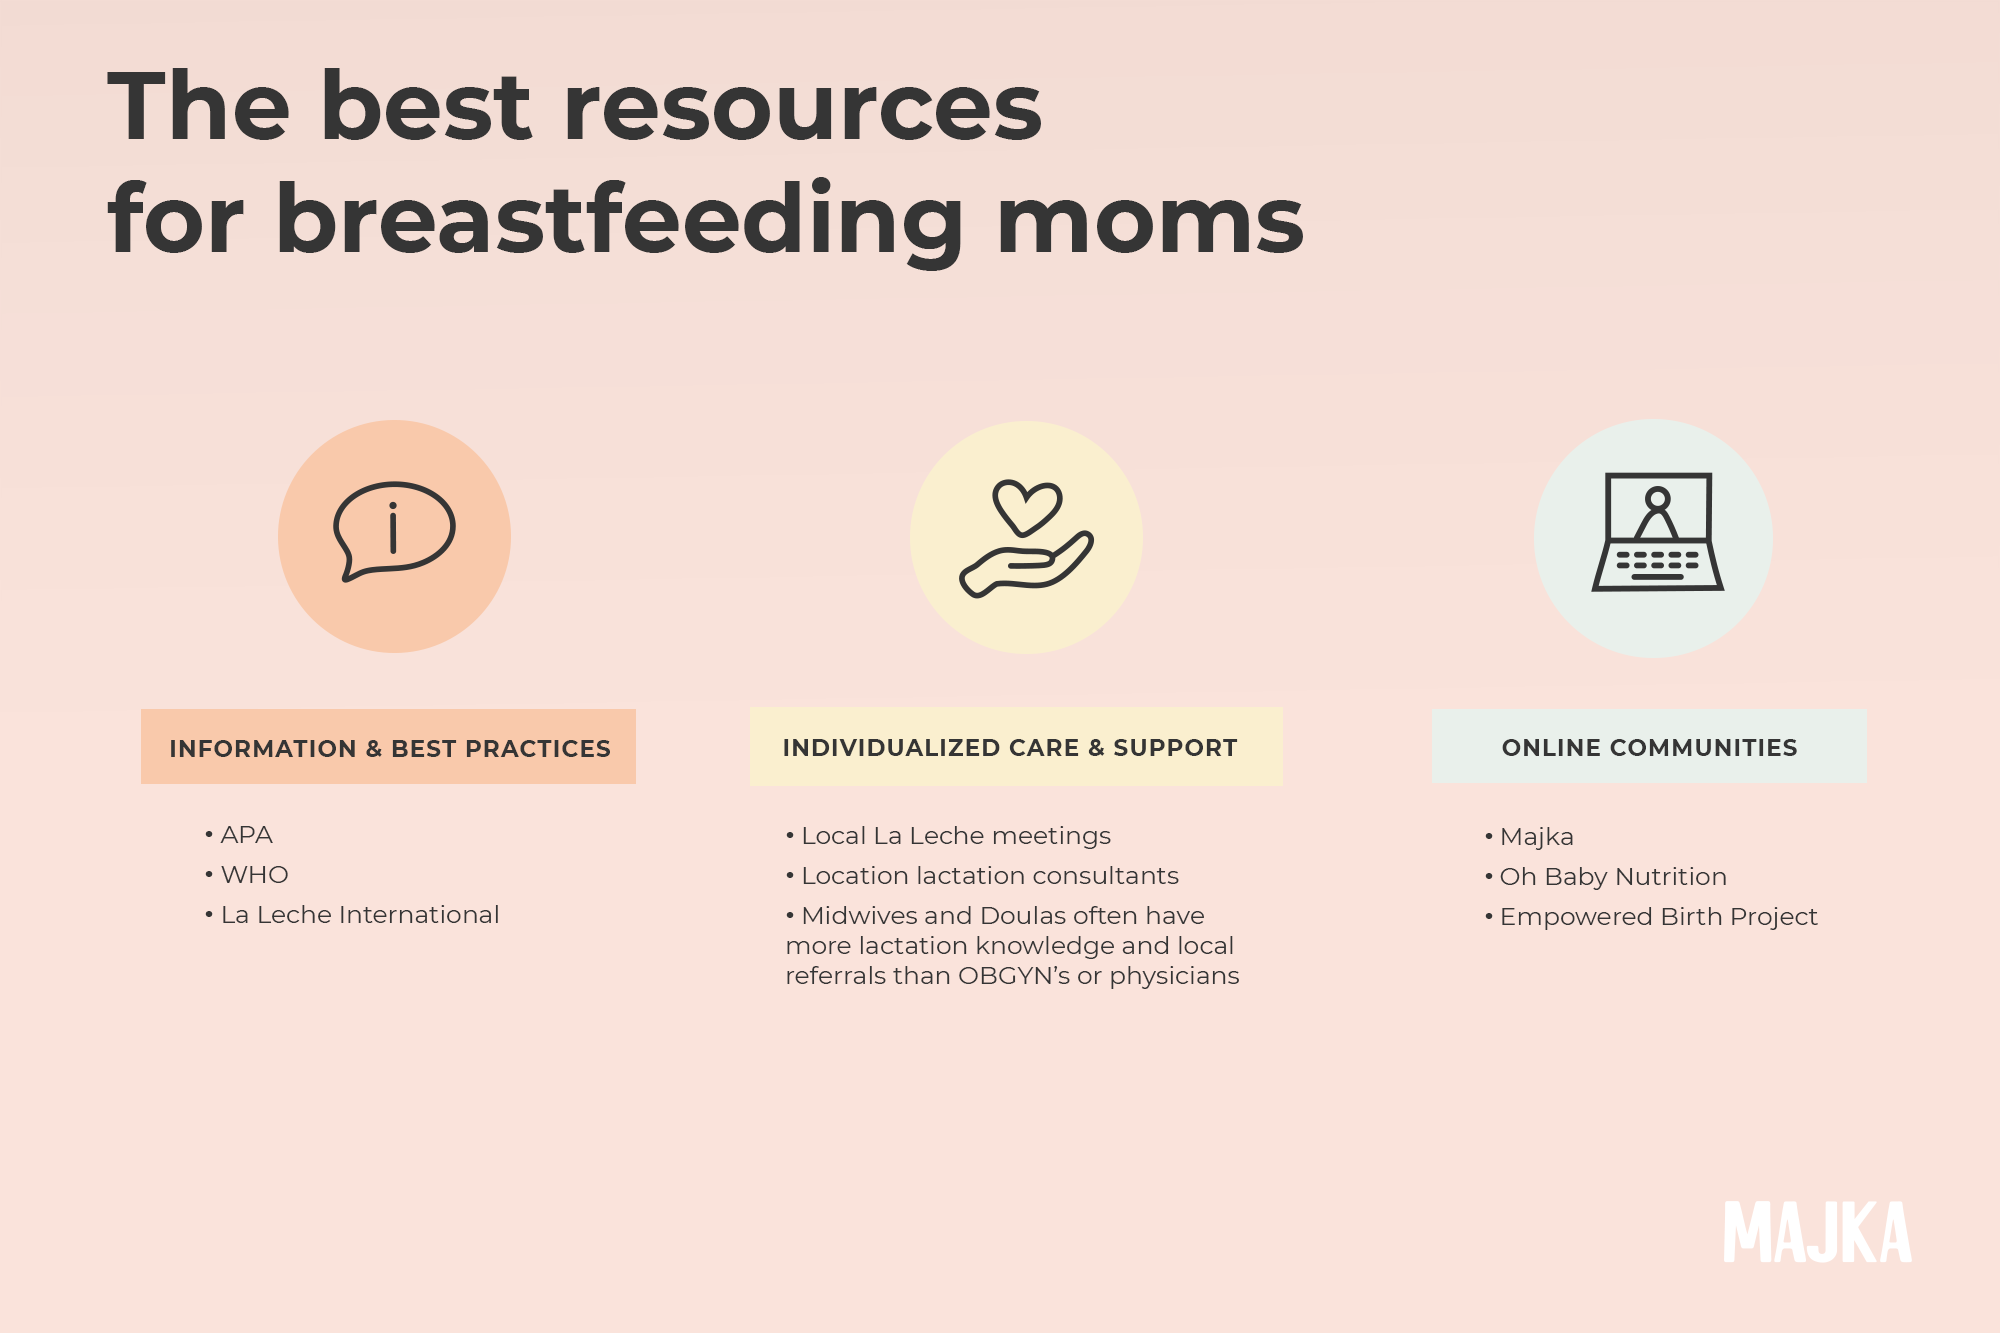 The Best Resources for Breastfeeding Moms